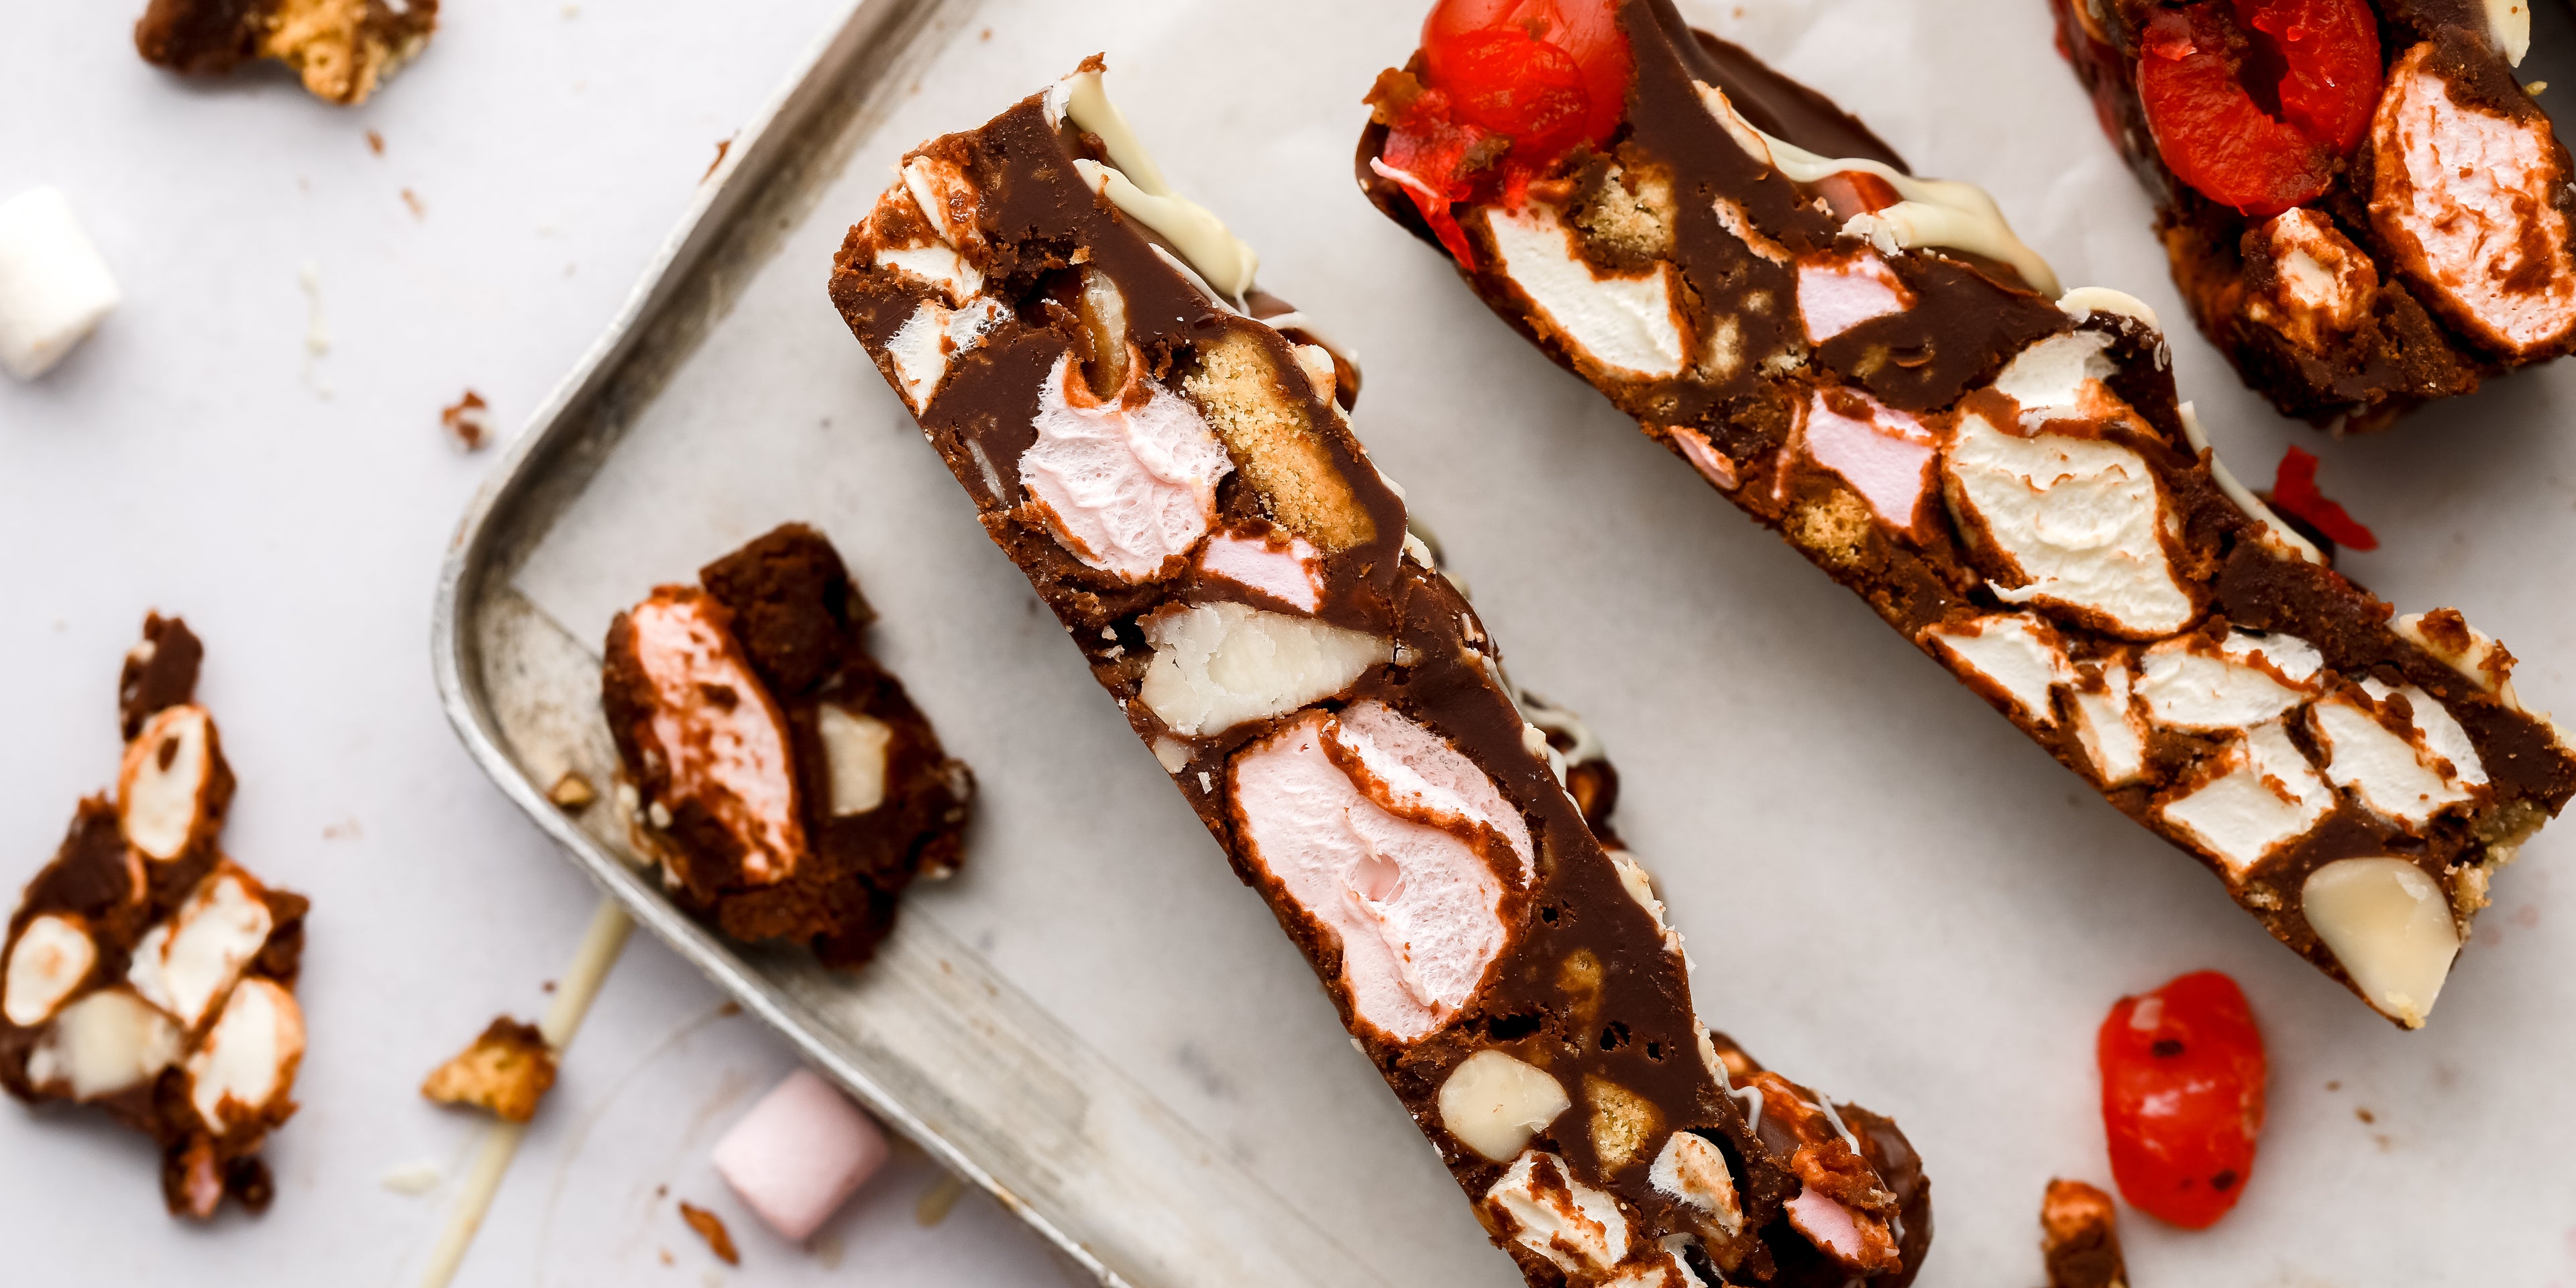 Close up of slices of rocky road showing cherries and marshmallows